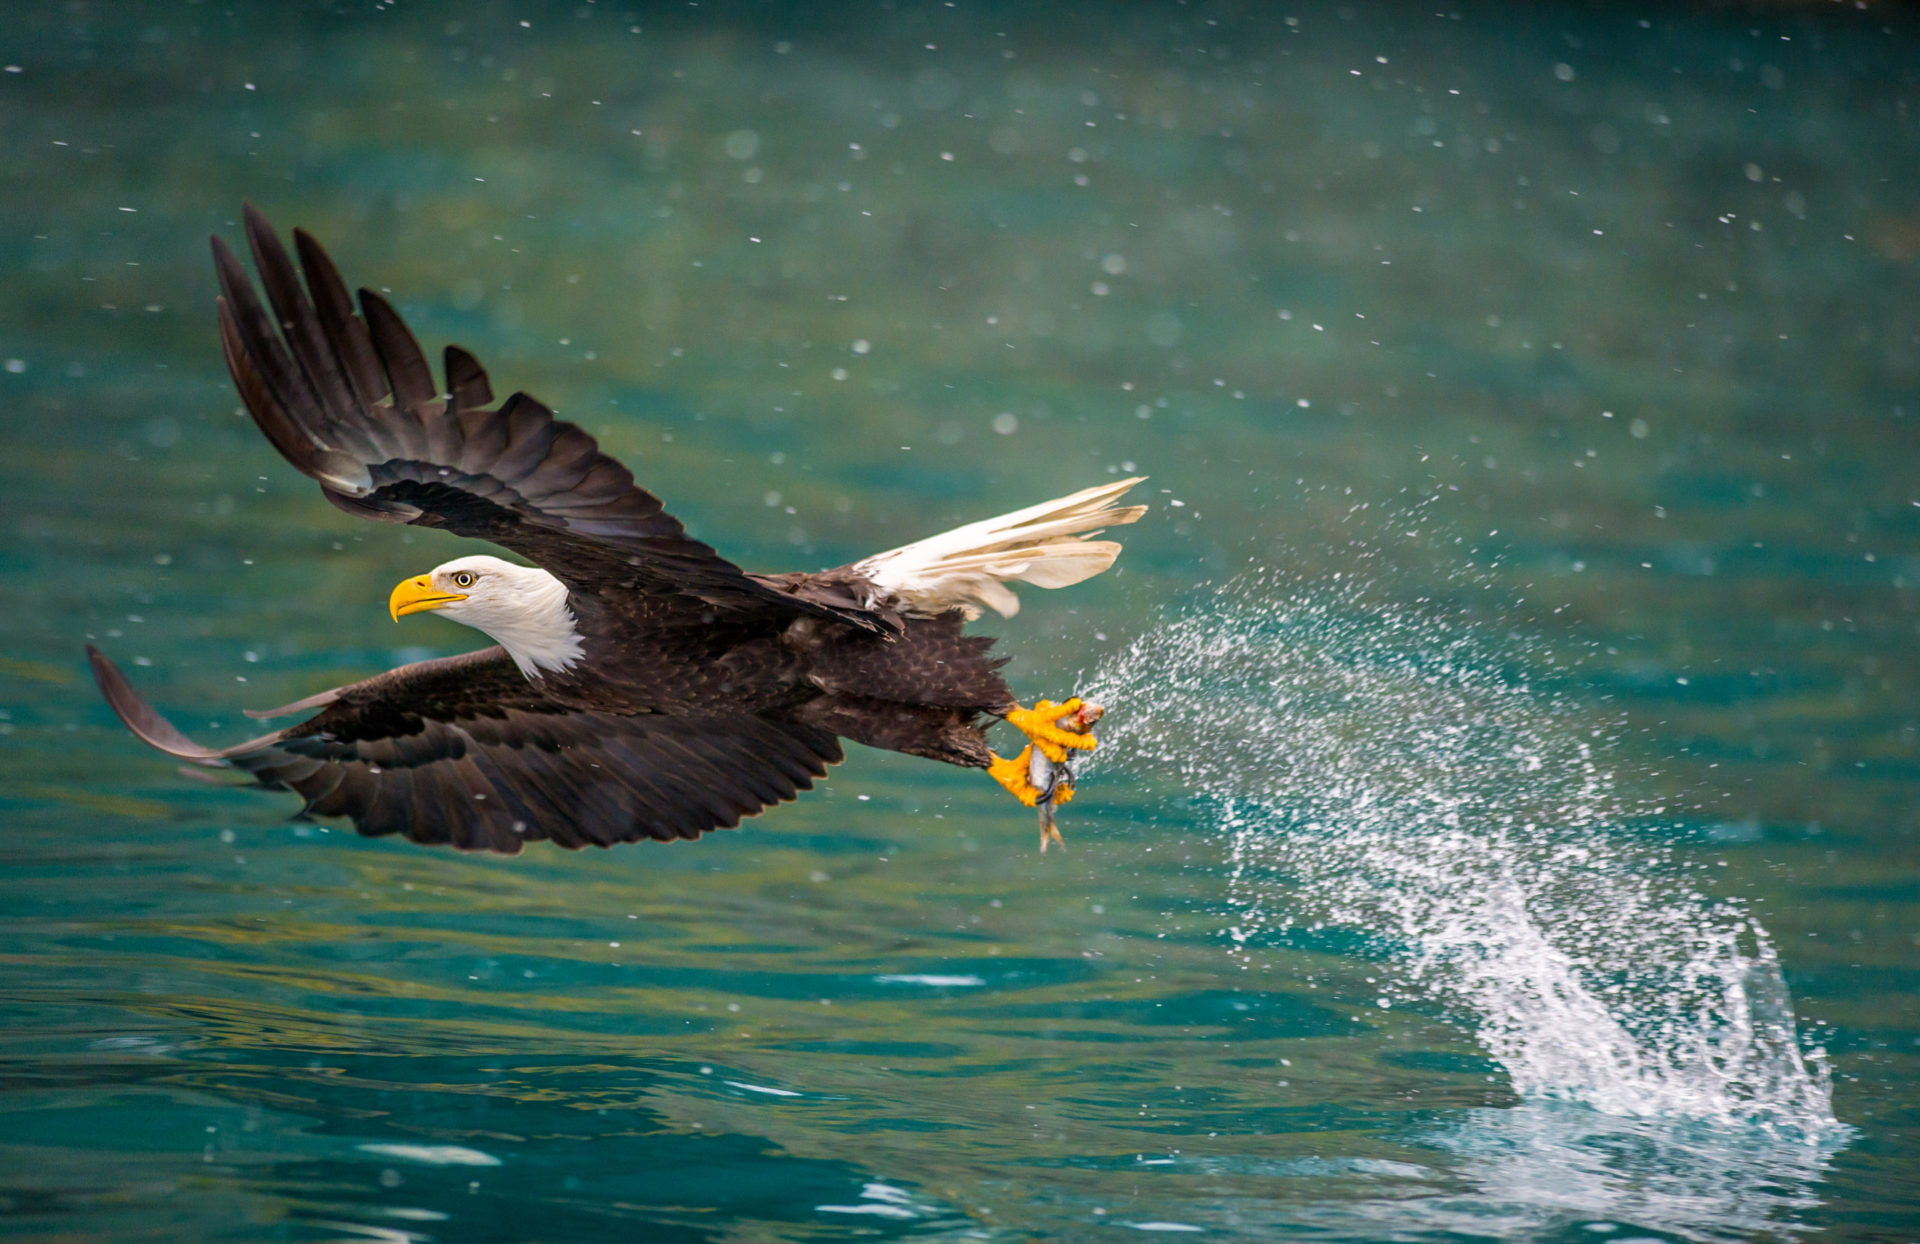 clear sharp bald eagle image snatching prey from water